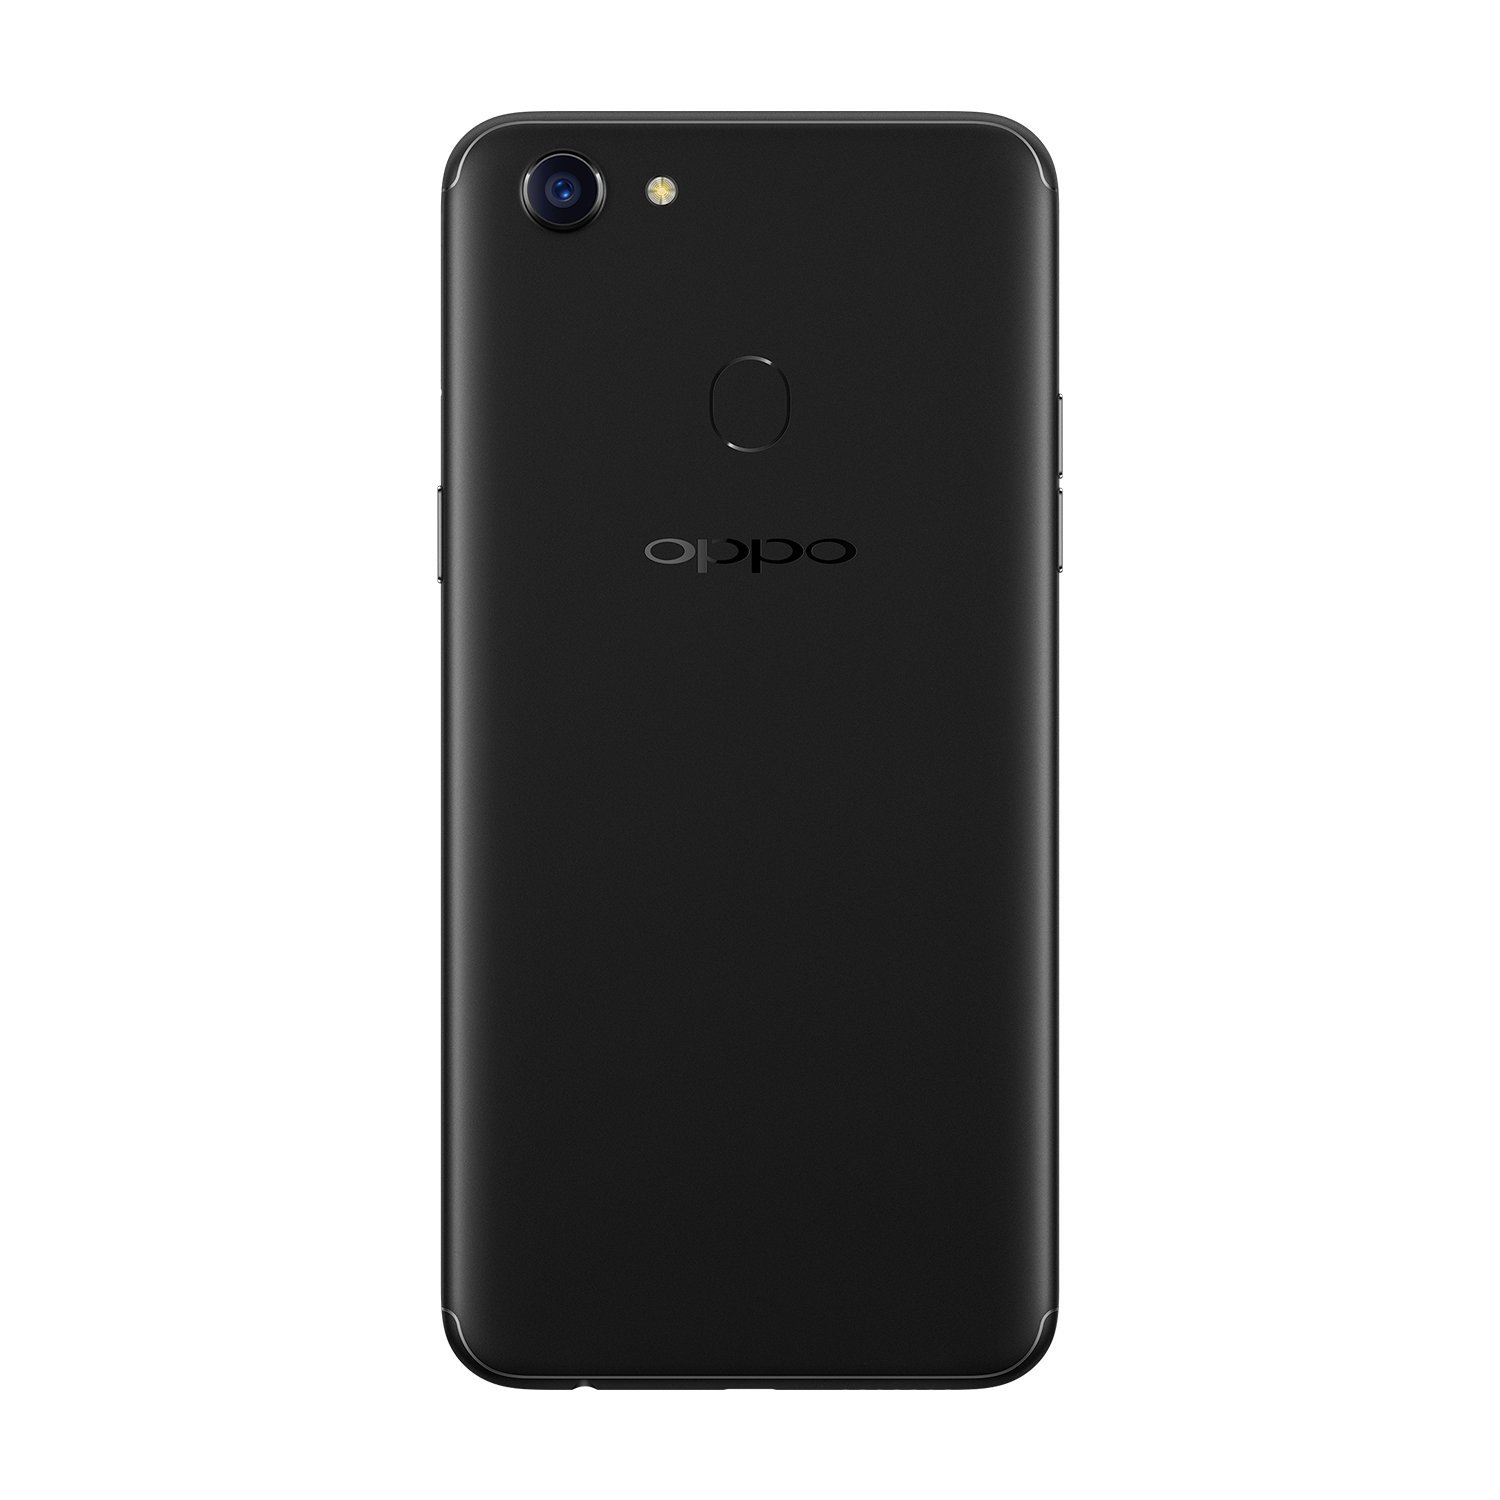 OPPO F5 (Black, Full Screen Display, 4 GB RAM) with Offers: Amazon ...